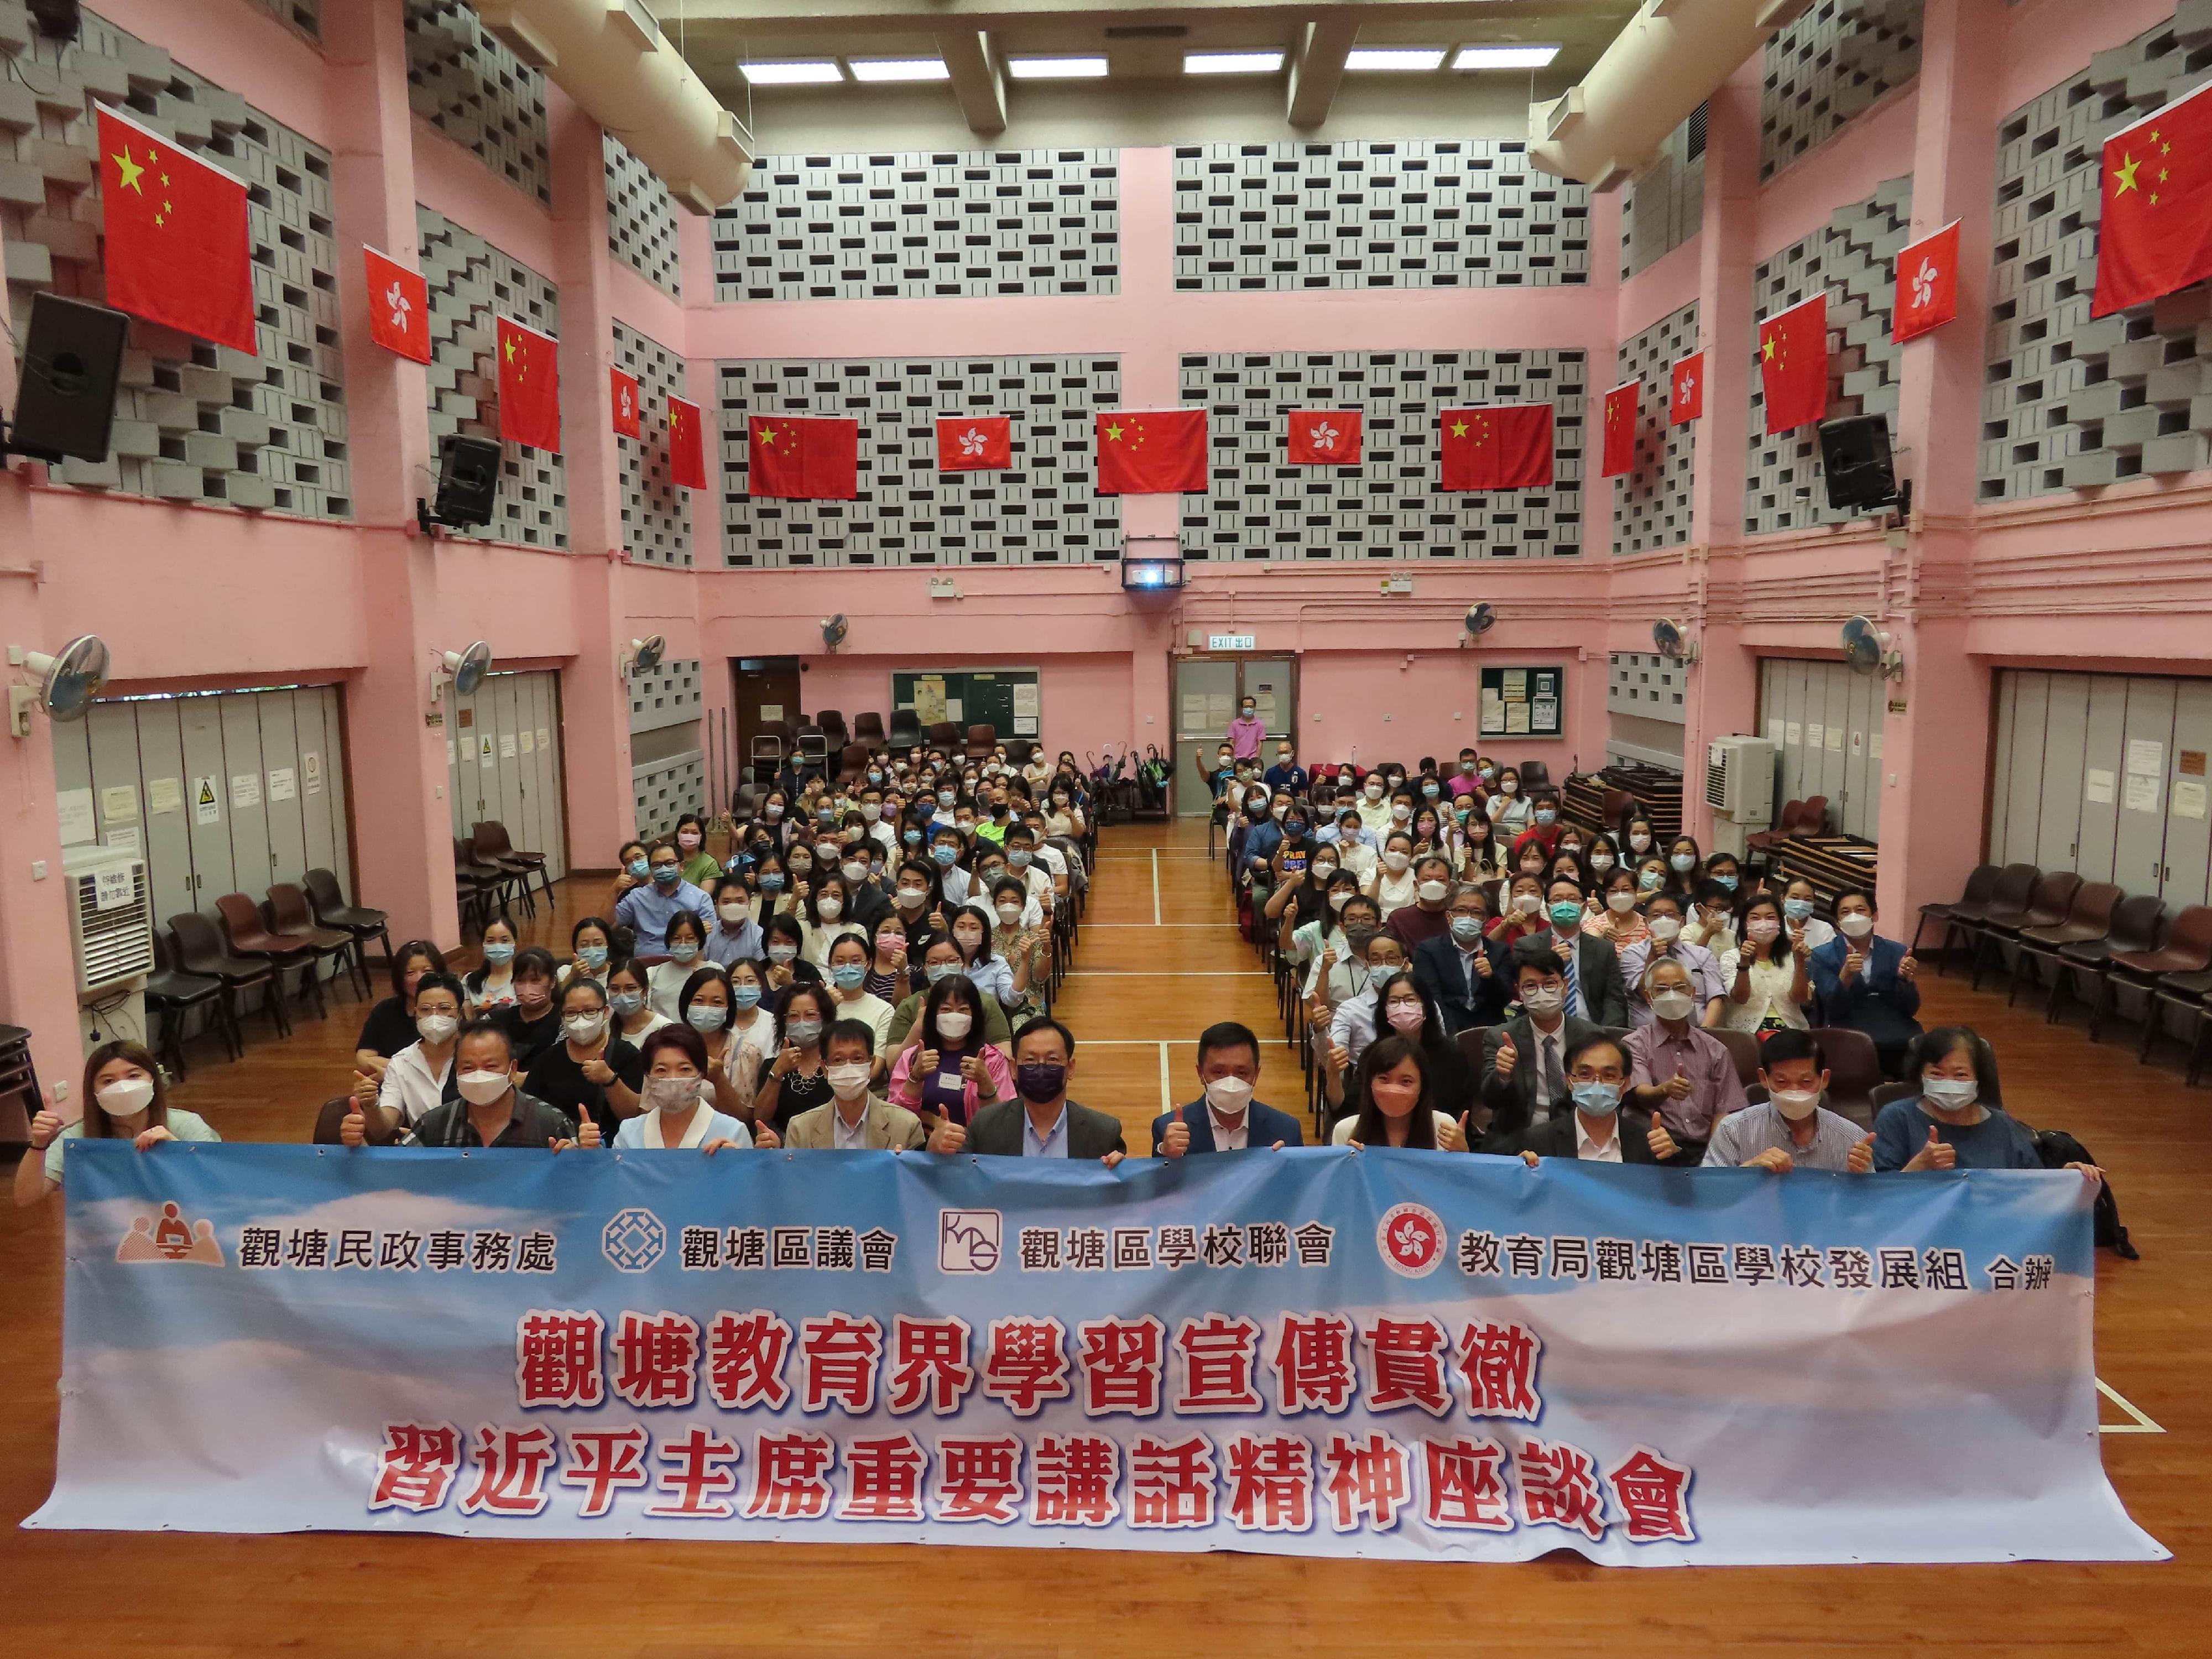 The Kwun Tong District Office, in collaboration with the Kwun Tong District Council, the Kwun Tong Schools Liaison Committee and the Kwun Tong District School Development Section of the Education Bureau, jointly held "Session for the Kwun Tong Education Sector to Learn about, Promote and Implement the Spirit of President Xi's Important Speech" at Kai Yip Community Hall on August 3. Photo shows the Chief School Development Officer (Kwun Tong) of the Education Bureau, Mr Simon Sit (front row, fourth left); the Chairman of the Kwun Tong District Council, Mr Wilson Or (front row, fifth left); Member of the Legislative Council Mr Tang Fei (front row, fifth right); the Acting District Officer (Kwun Tong), Miss Cherry Sum (front row, fourth right); and the Chairman of the Kwun Tong Schools Liaison Committee, Mr Wong Chi-keung (front row, third right), together with other guests and participants at the session.